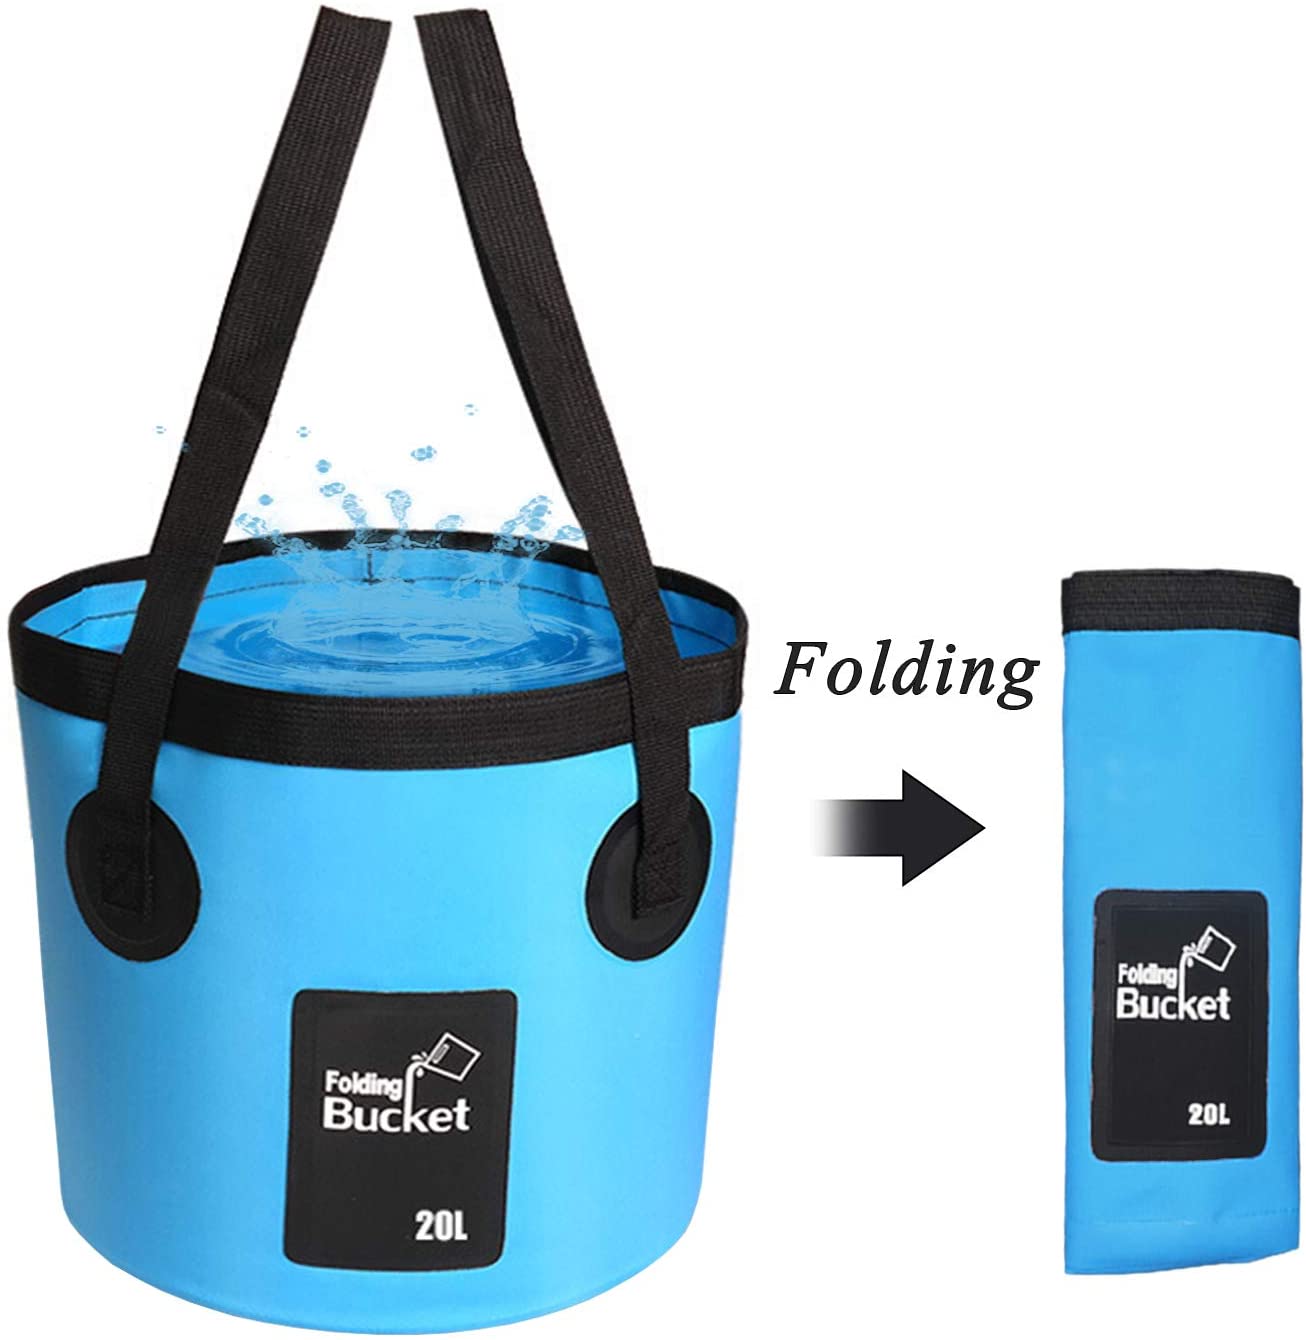 Multifunctional Portable Collapsible Wash Basin Water Container Fishing Bucket for Travelling Camping Hiking Fishing Car Washing 3-5 Gallon INNVO Folding Bucket 